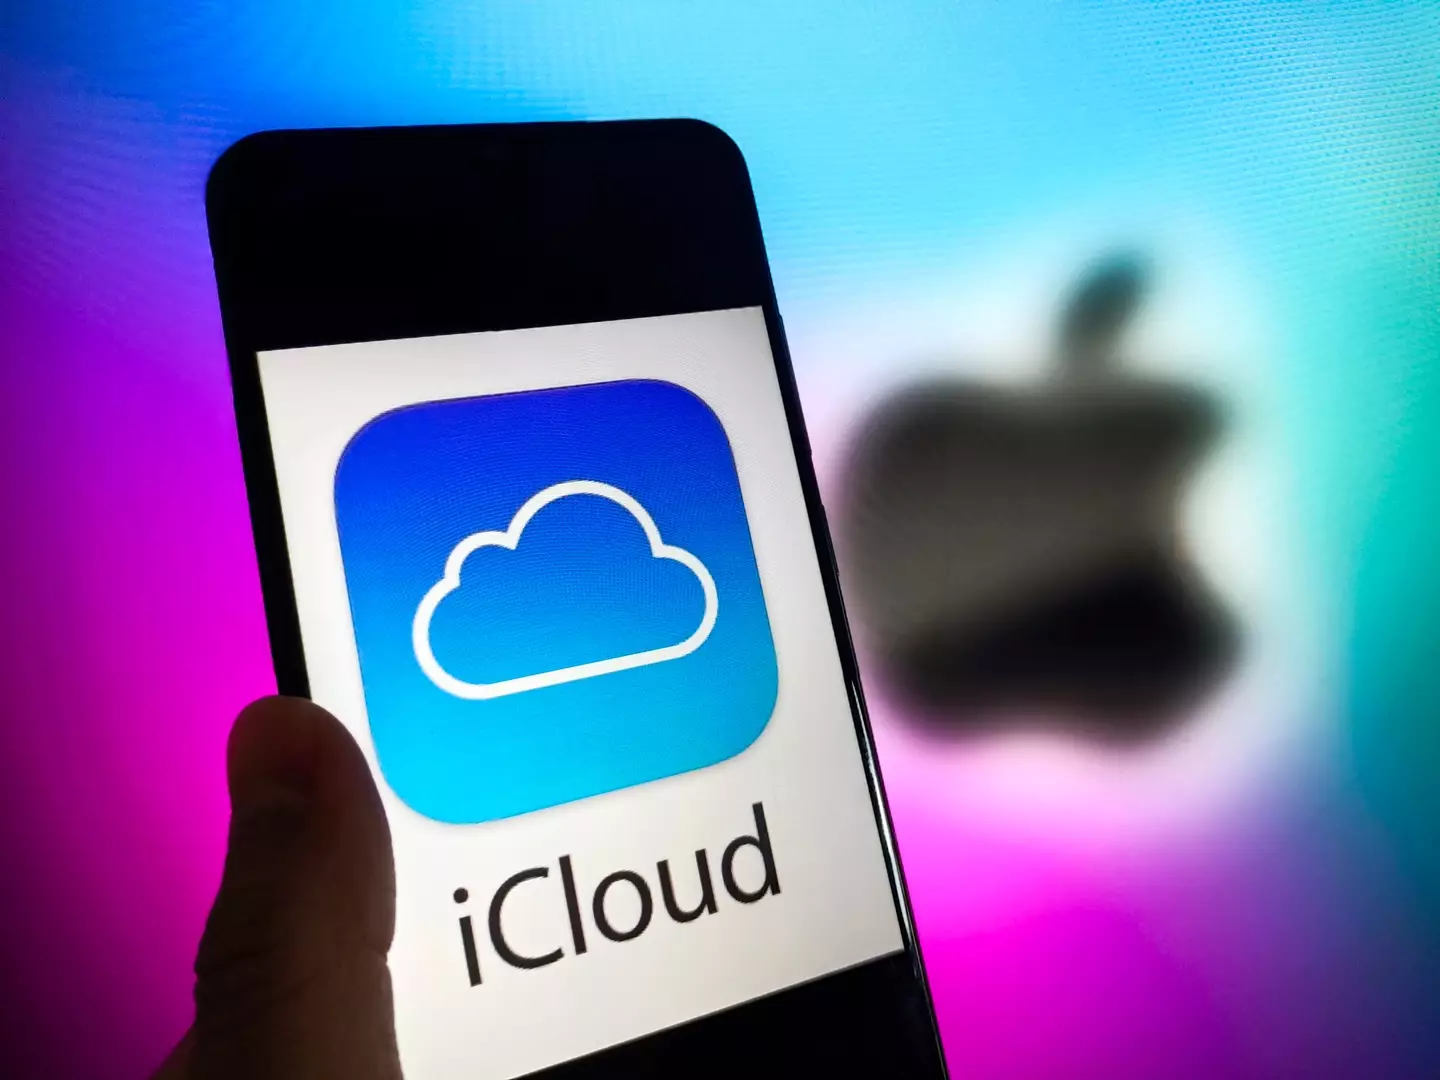 iCloud stores all kinds of data across all your Apple devices (CFOTO / Contributor via Getty)